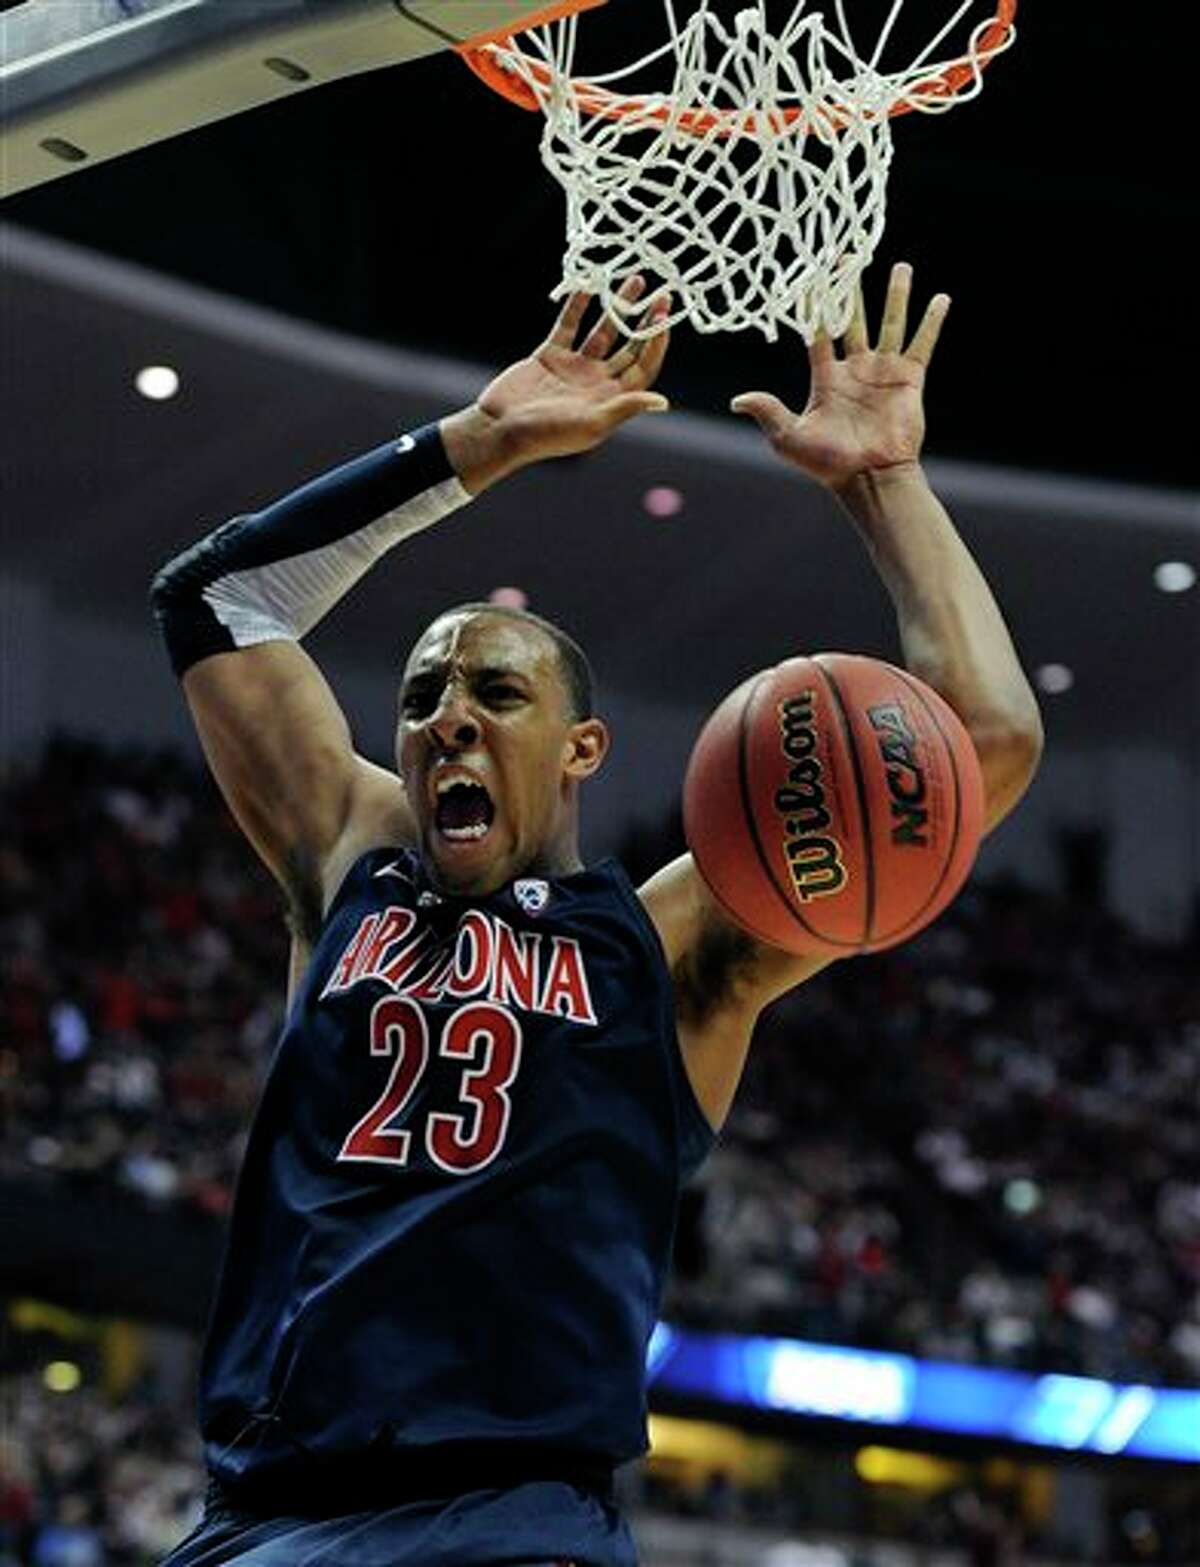 Arizona's Derrick Williams dunking during the second half of an NCAA West regional college basketball championship game, in Anaheim, Calif. Williams is a top prospect in the 2011 NBA draft. (AP Photo/Mark J. Terrill)